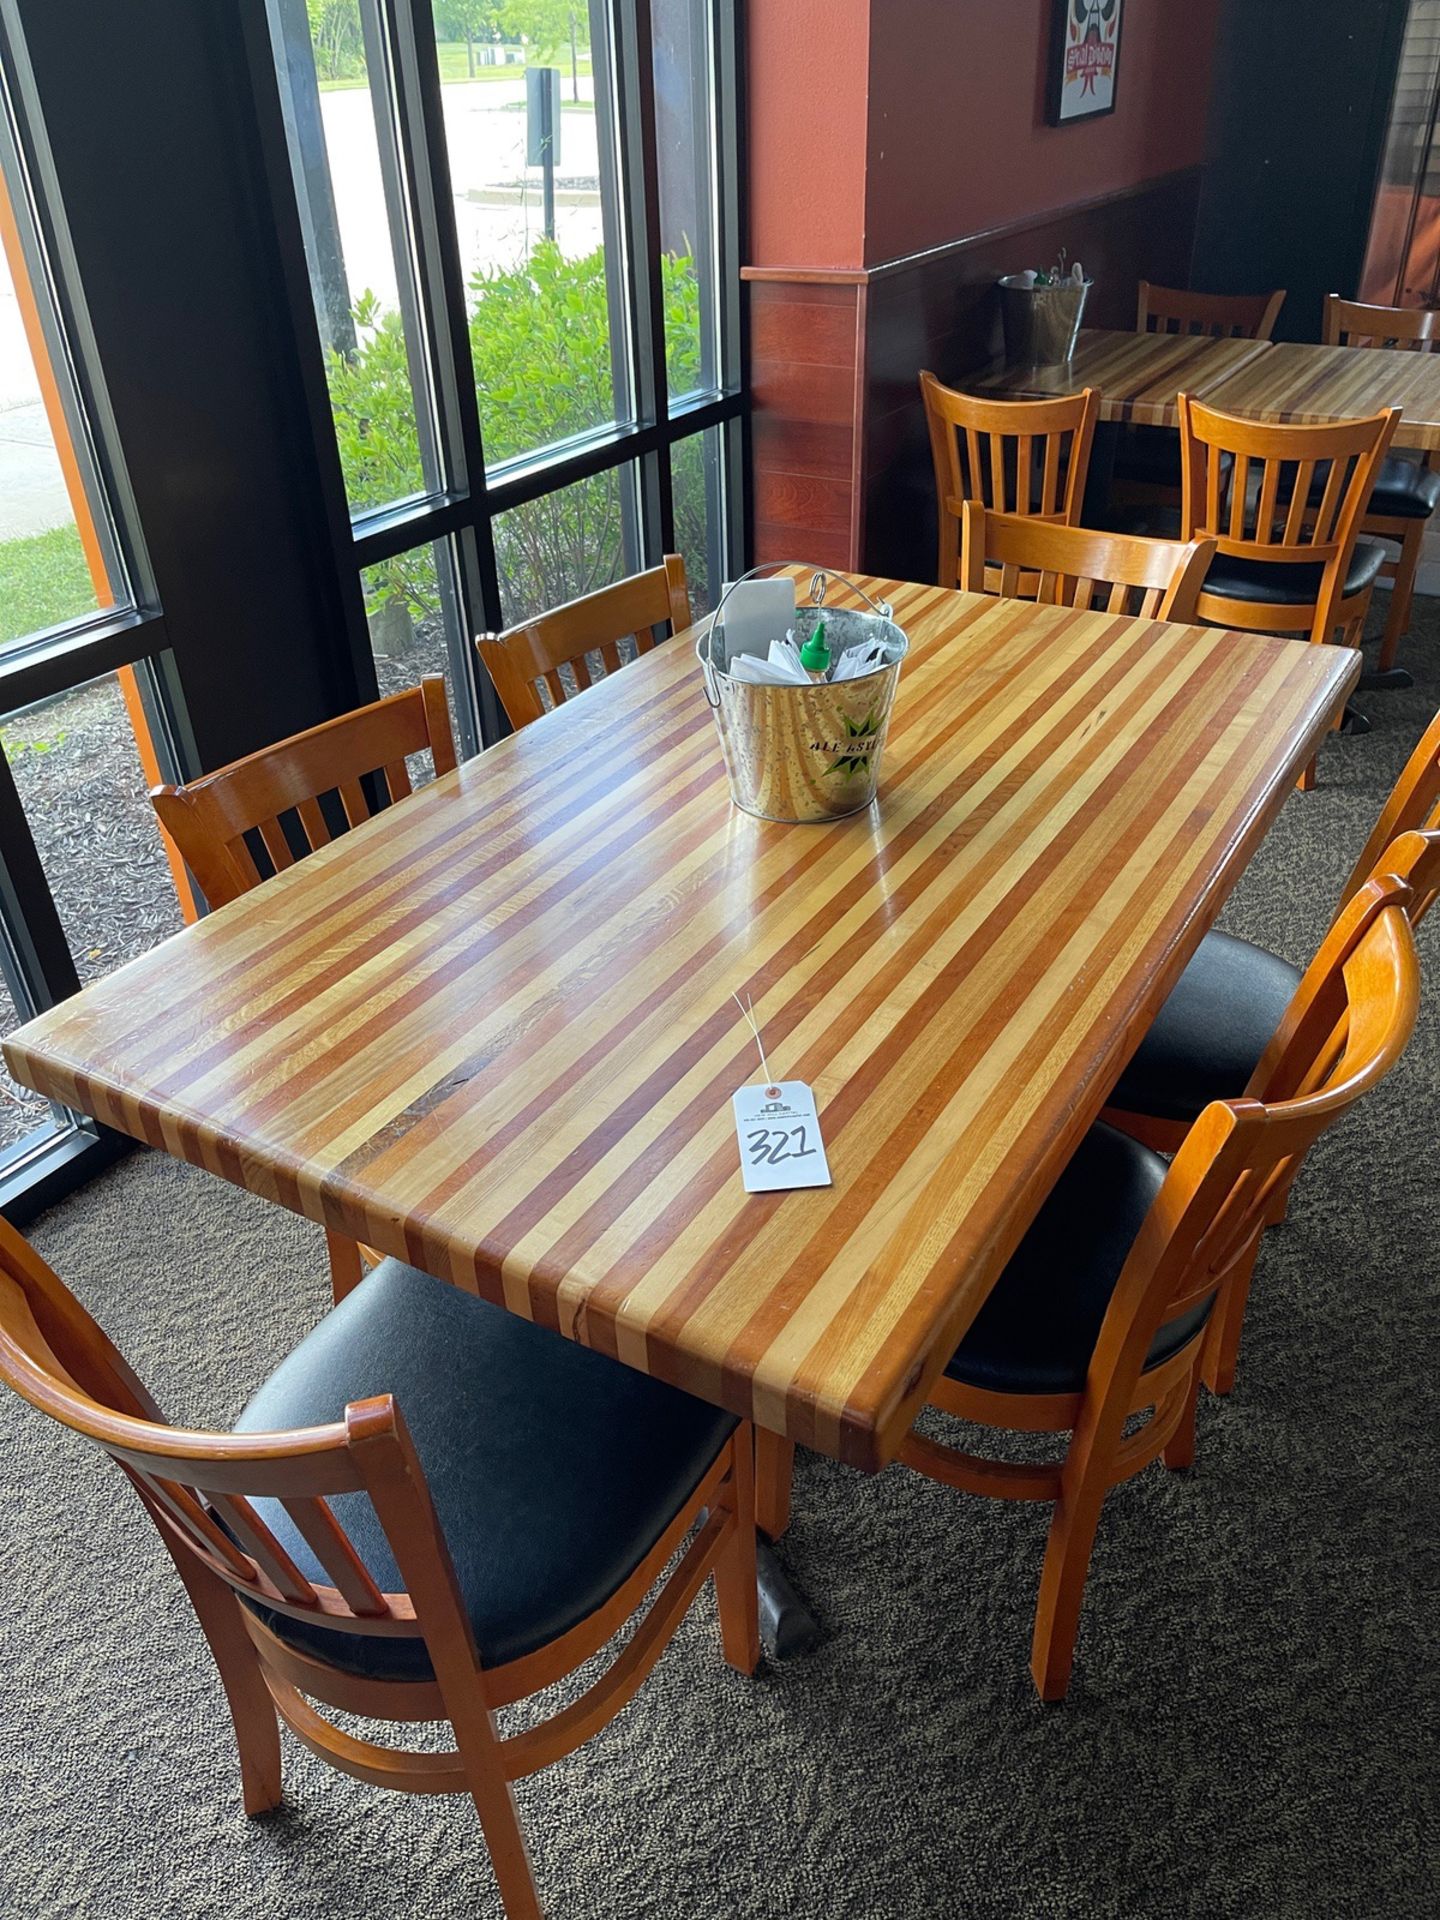 (3) Wooden 6 Top, Dual Pedestal Tables with (18) Wooden Chairs, Approx. 35" x 5' x | Rig Fee $100